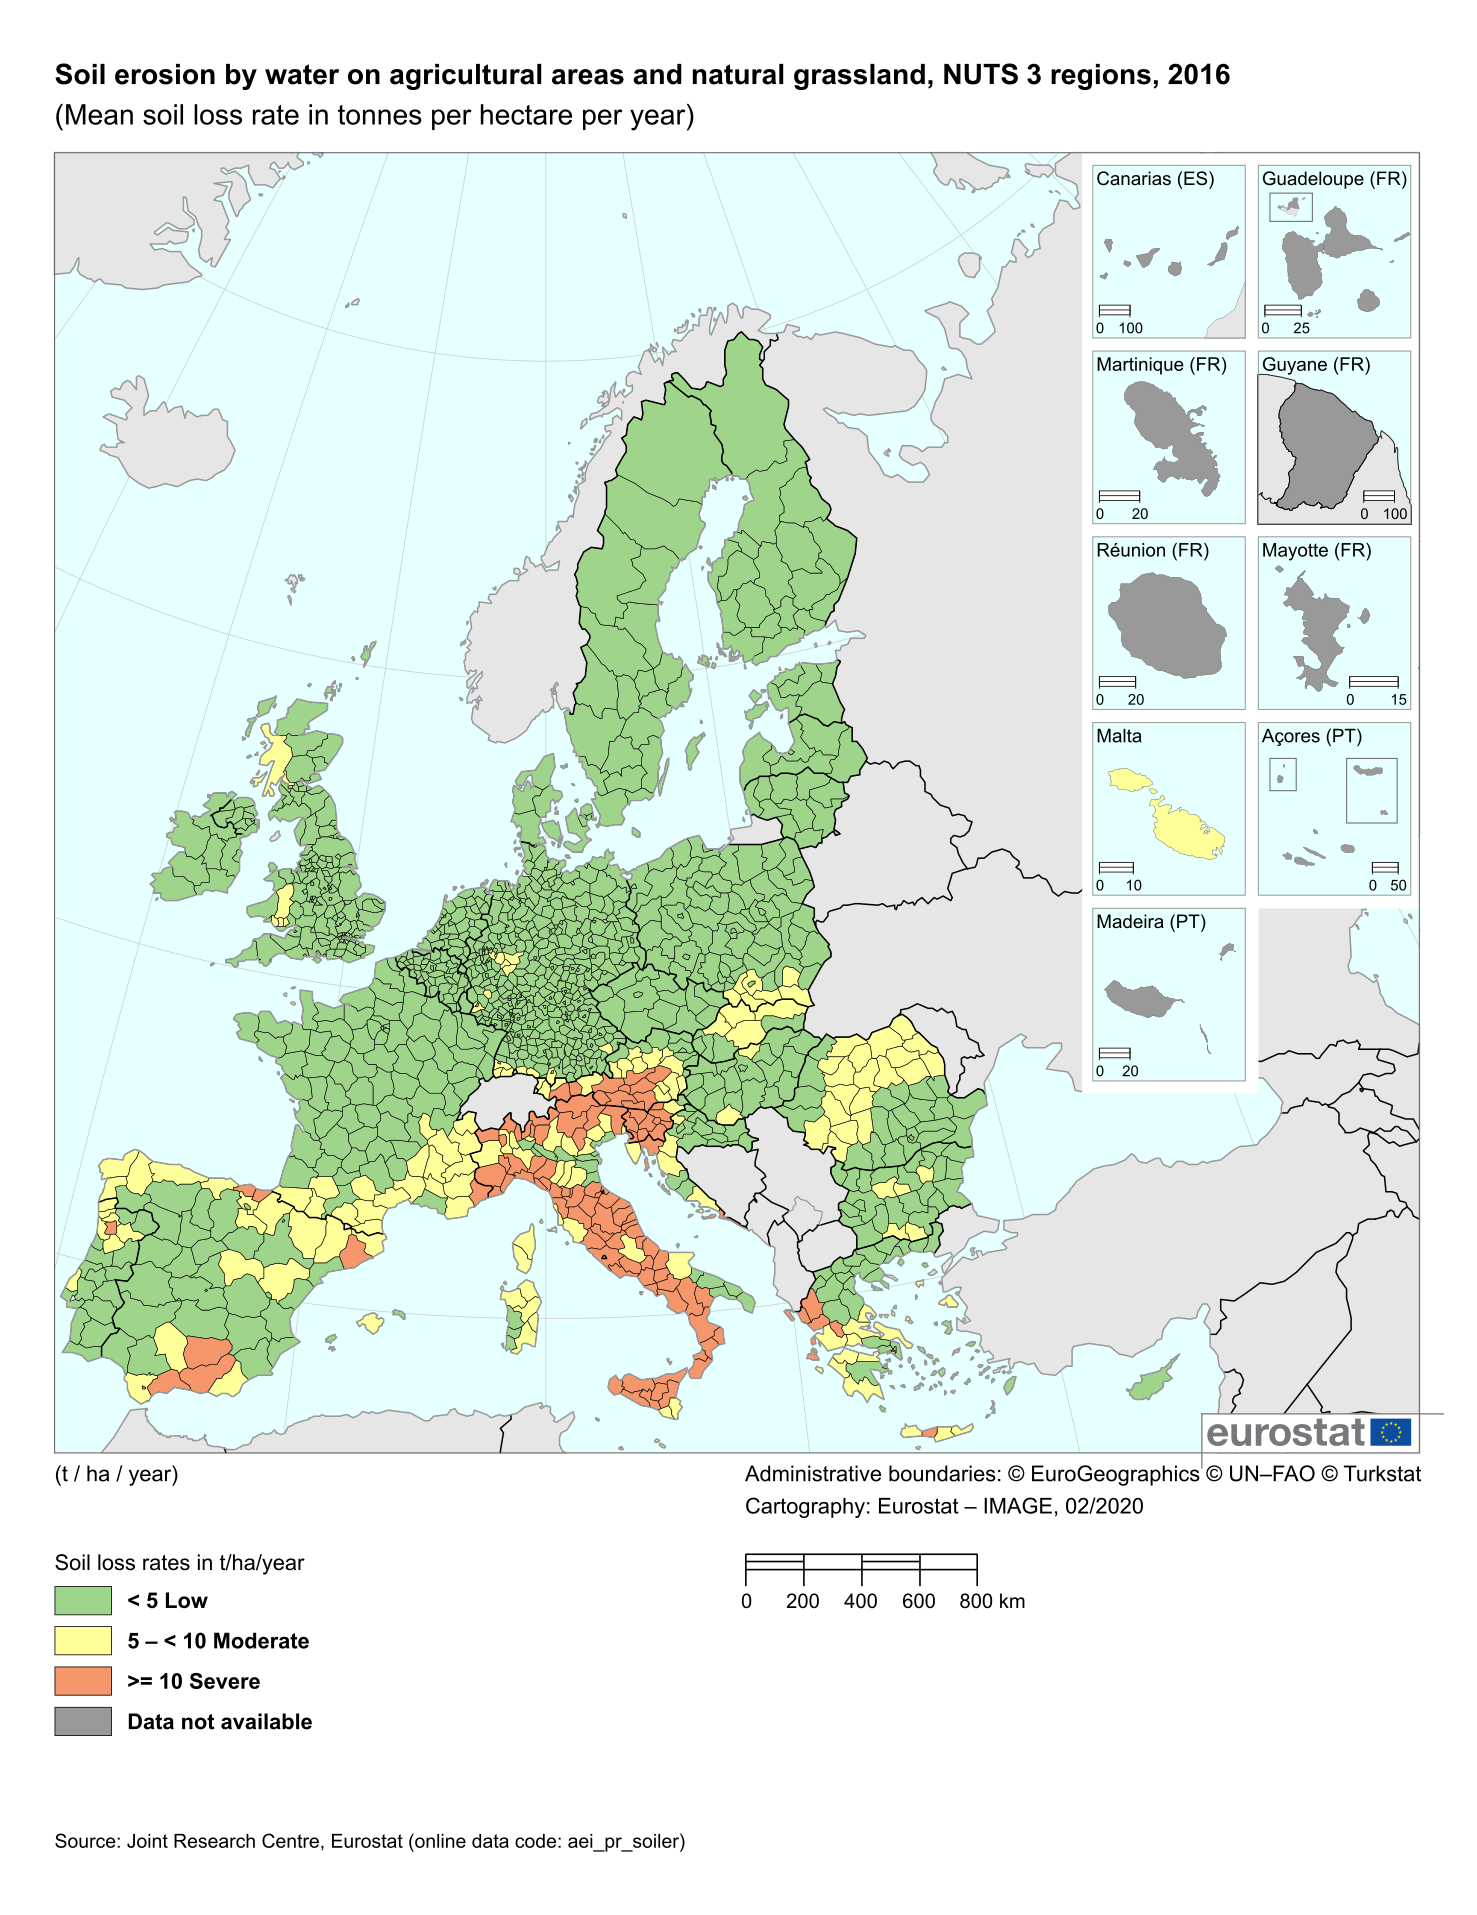 Soil erosion by water on agricultural areas and natural grassland, NUTS 3 regions, 2016. Source: EUROSTAT